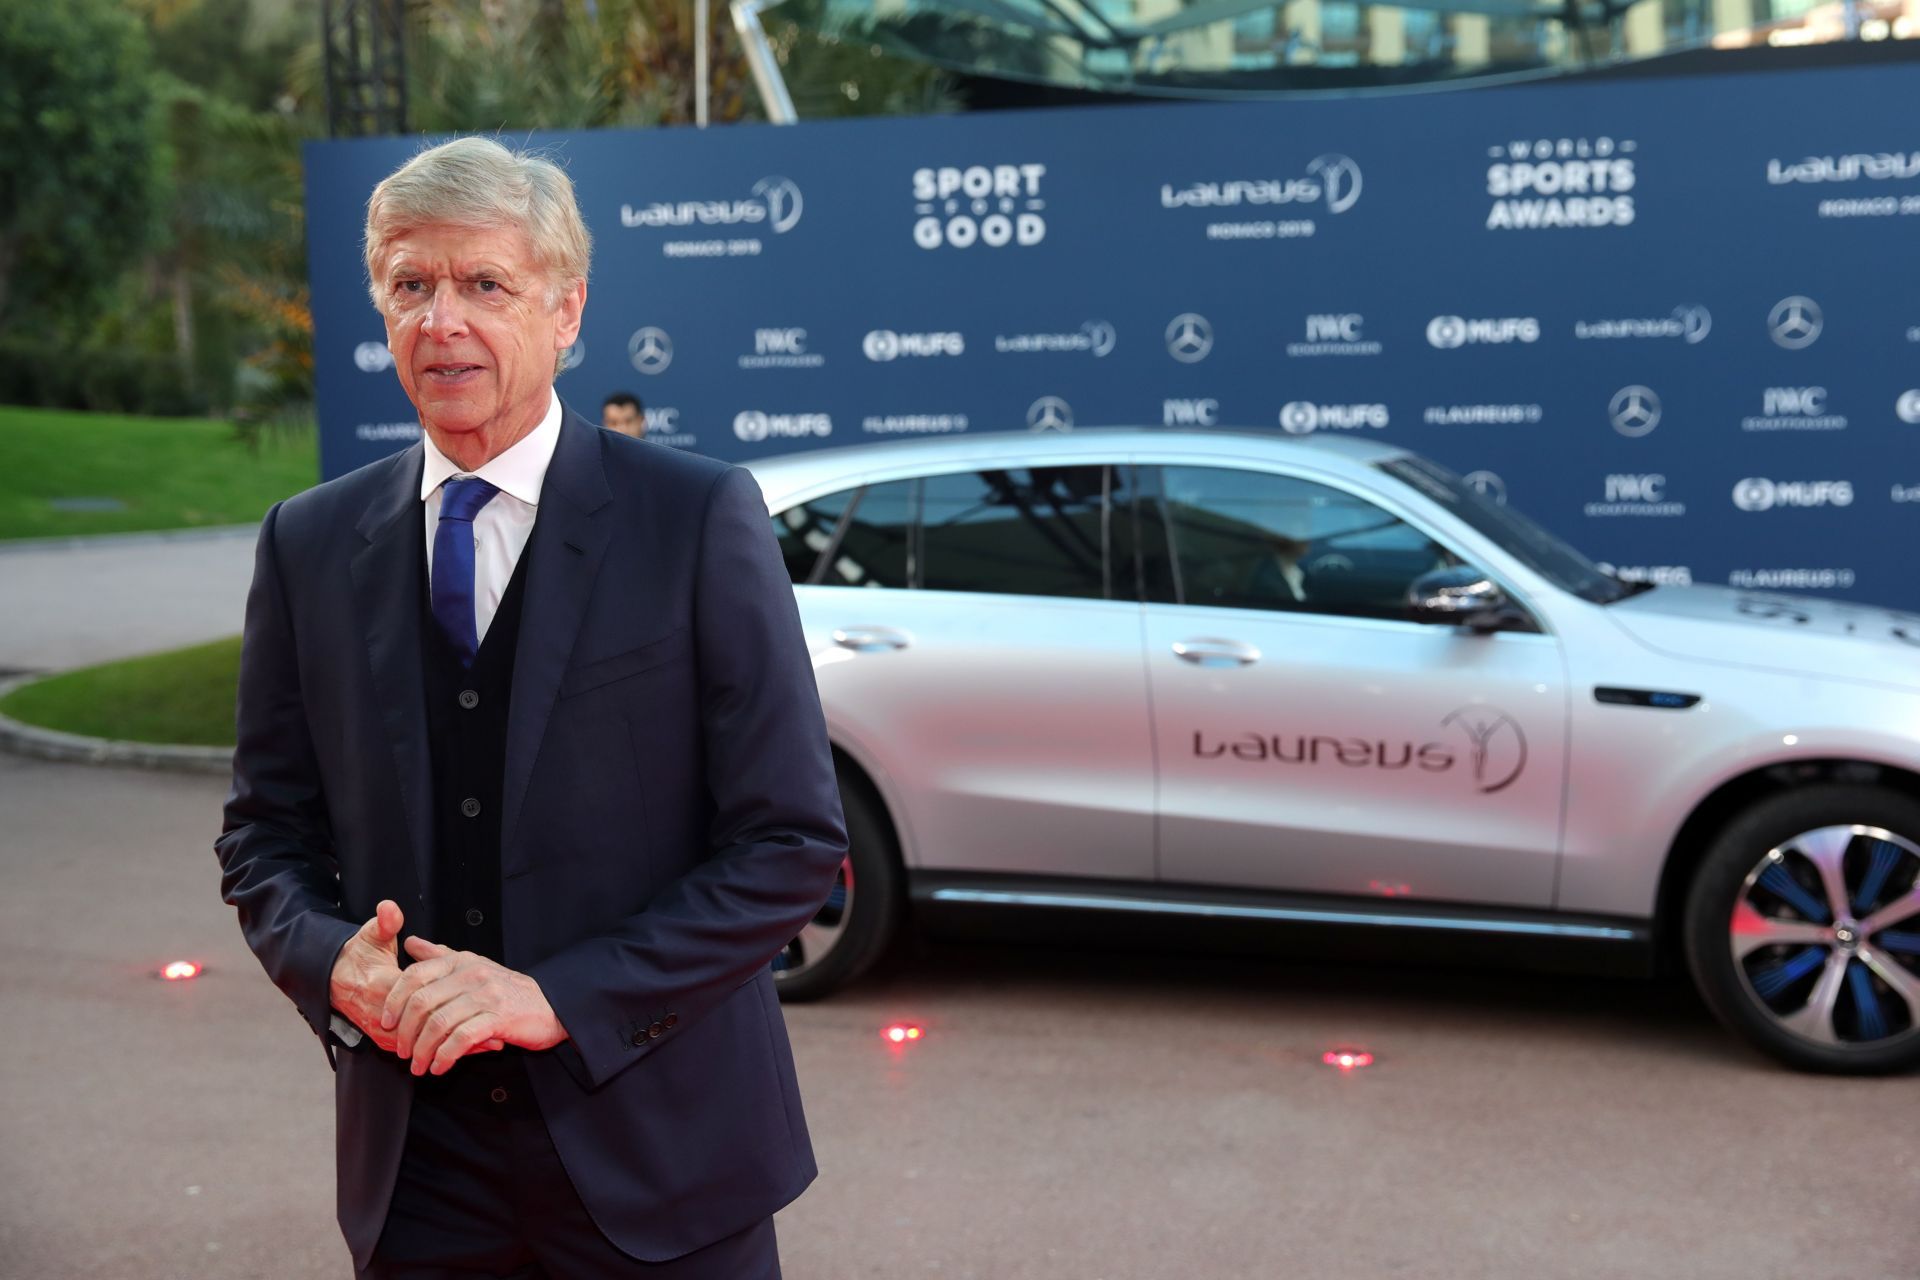 Arsenal legend Arsene Wenger has always been outspoken in his criticism of the Ballon d&#039;Or award.